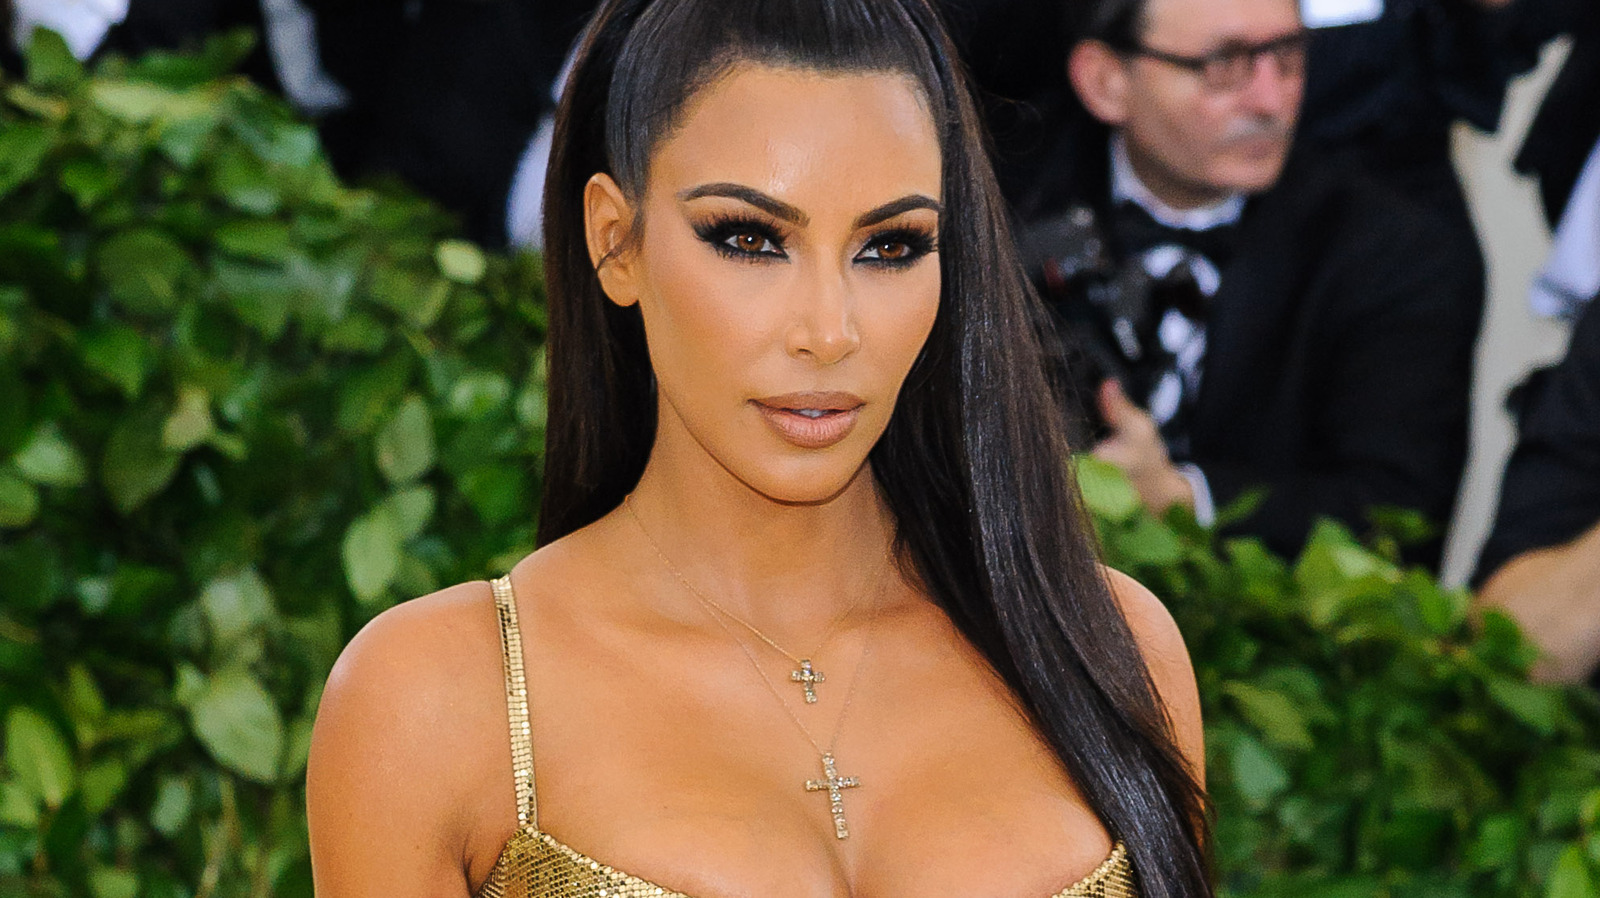 Kim Kardashian Sparks Demand For Tanning Beds - Here's Why This Is Troubling